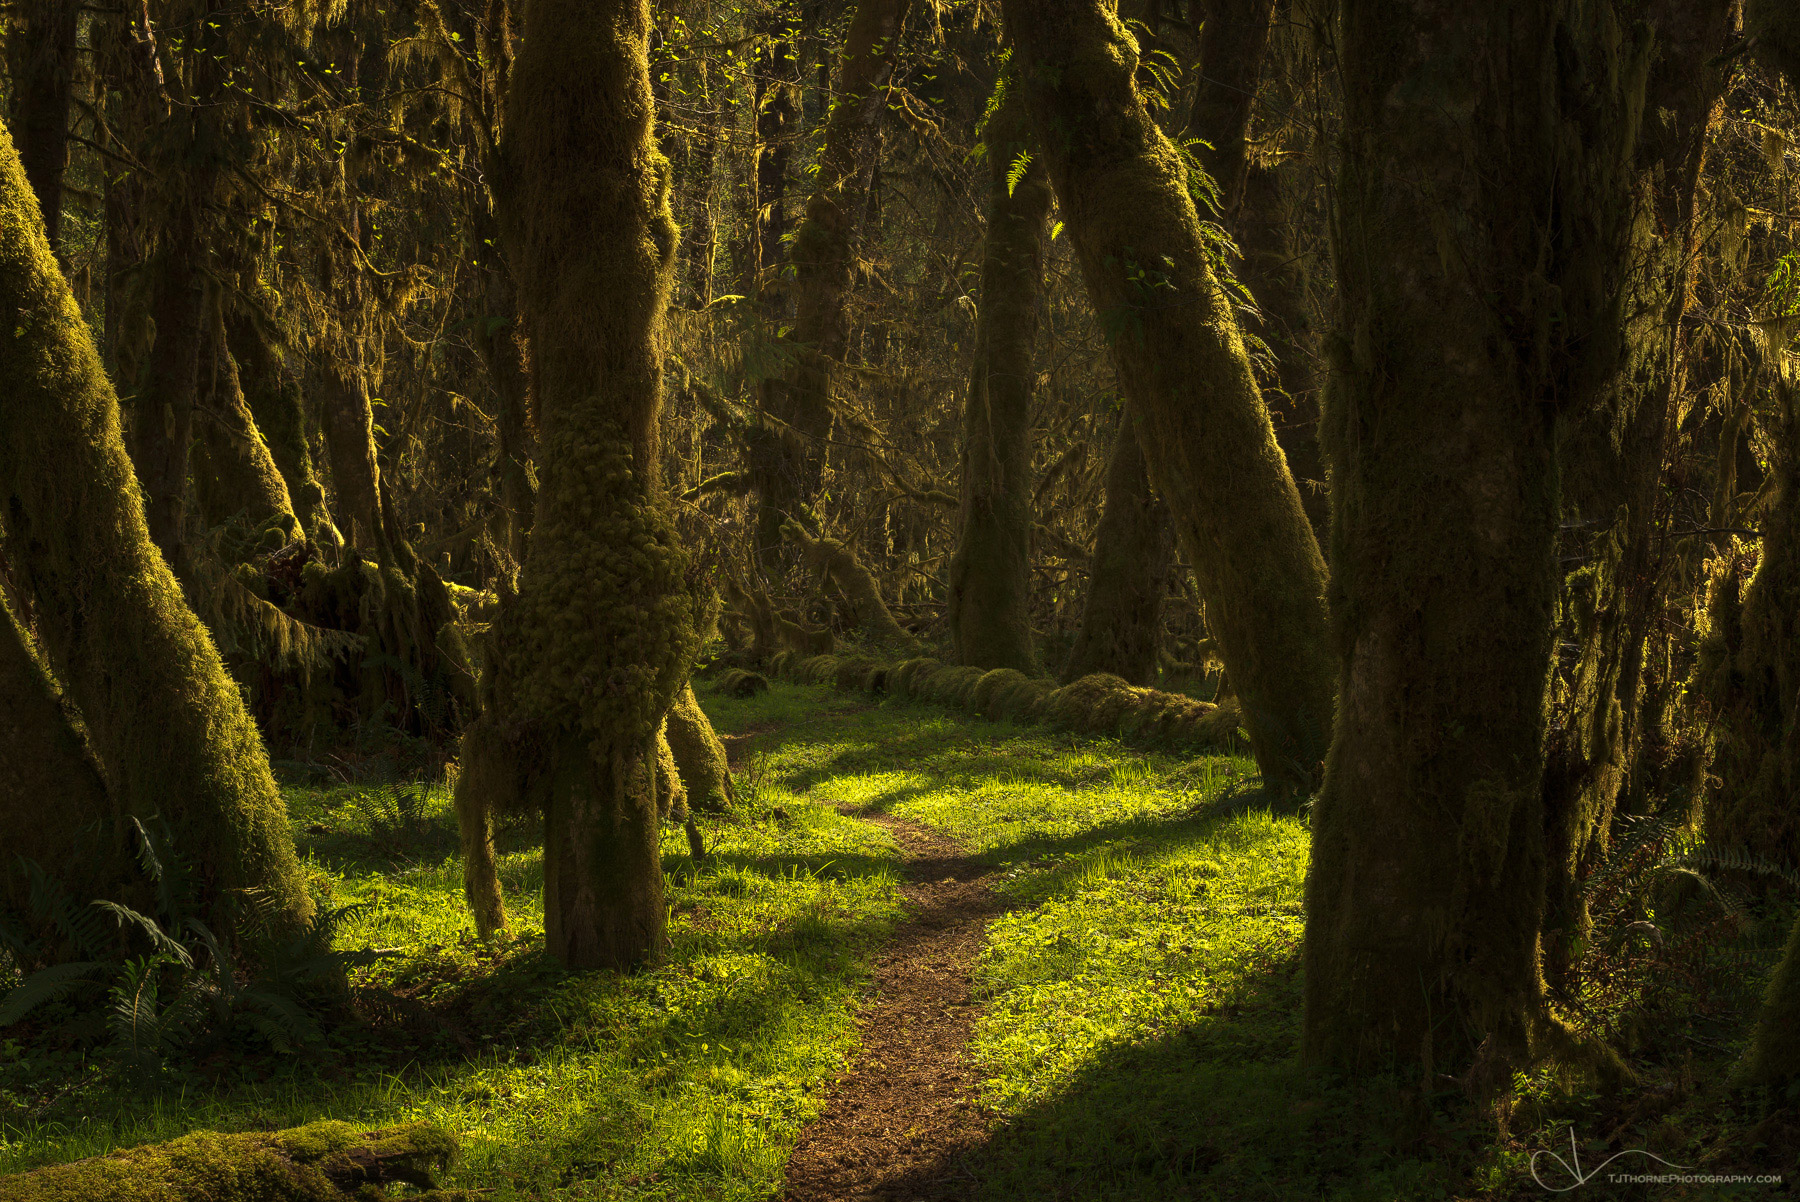 A secluded trail through the rainforest in Olympic National Park, Washington.